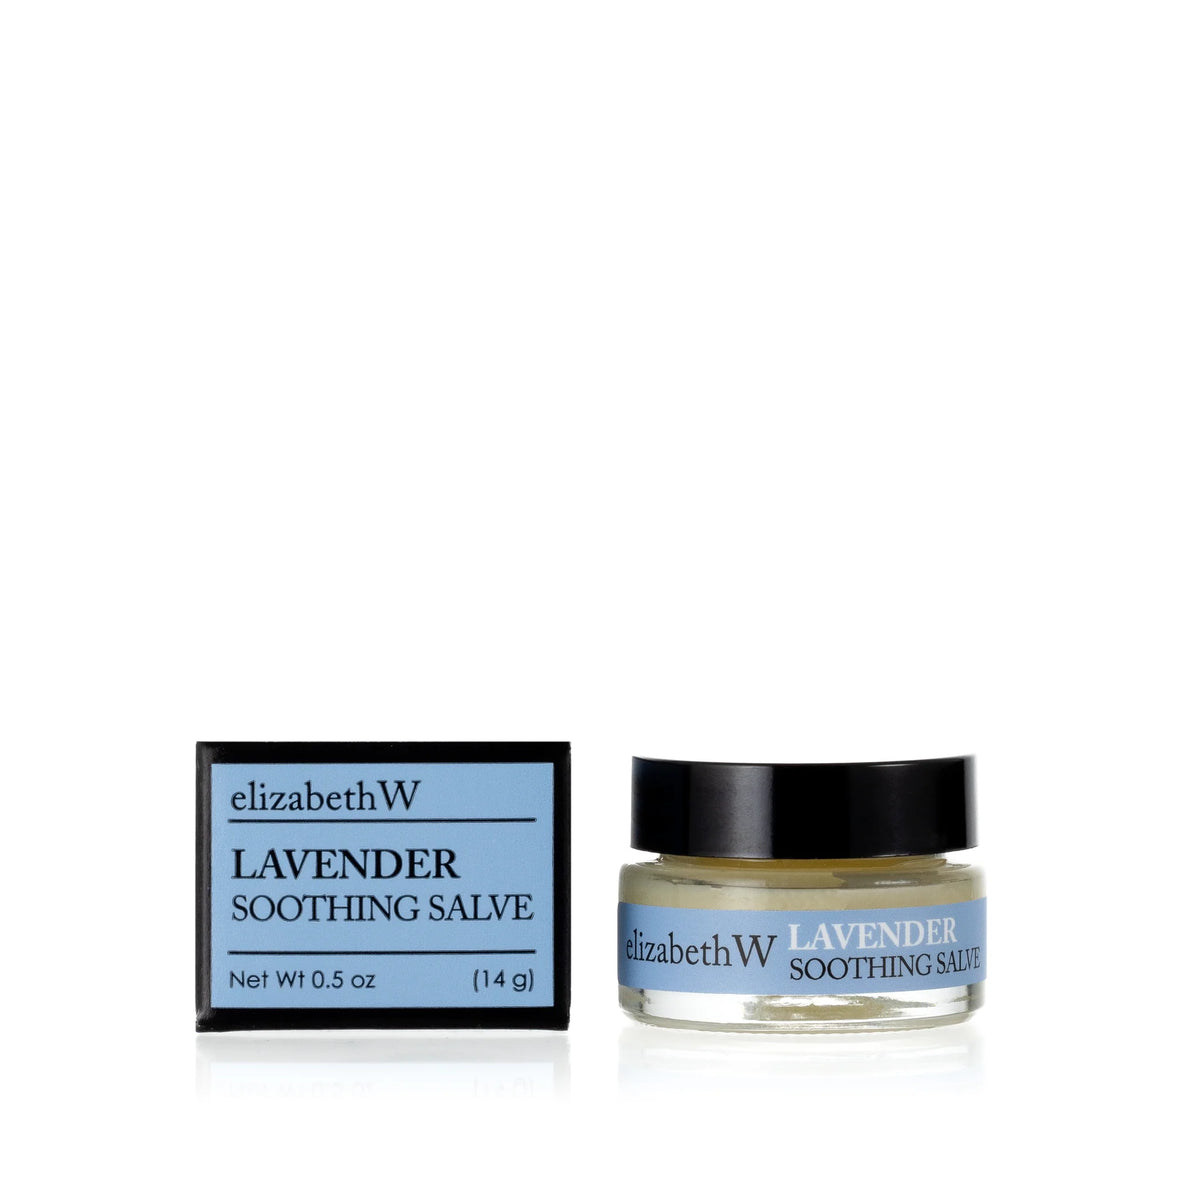 A small jar and box of elizabeth W Botanical Apothecary Lavender Soothing Salve with California Poppy Extract, both labeled, shown isolated on a white background with the jar slightly in front of the box.